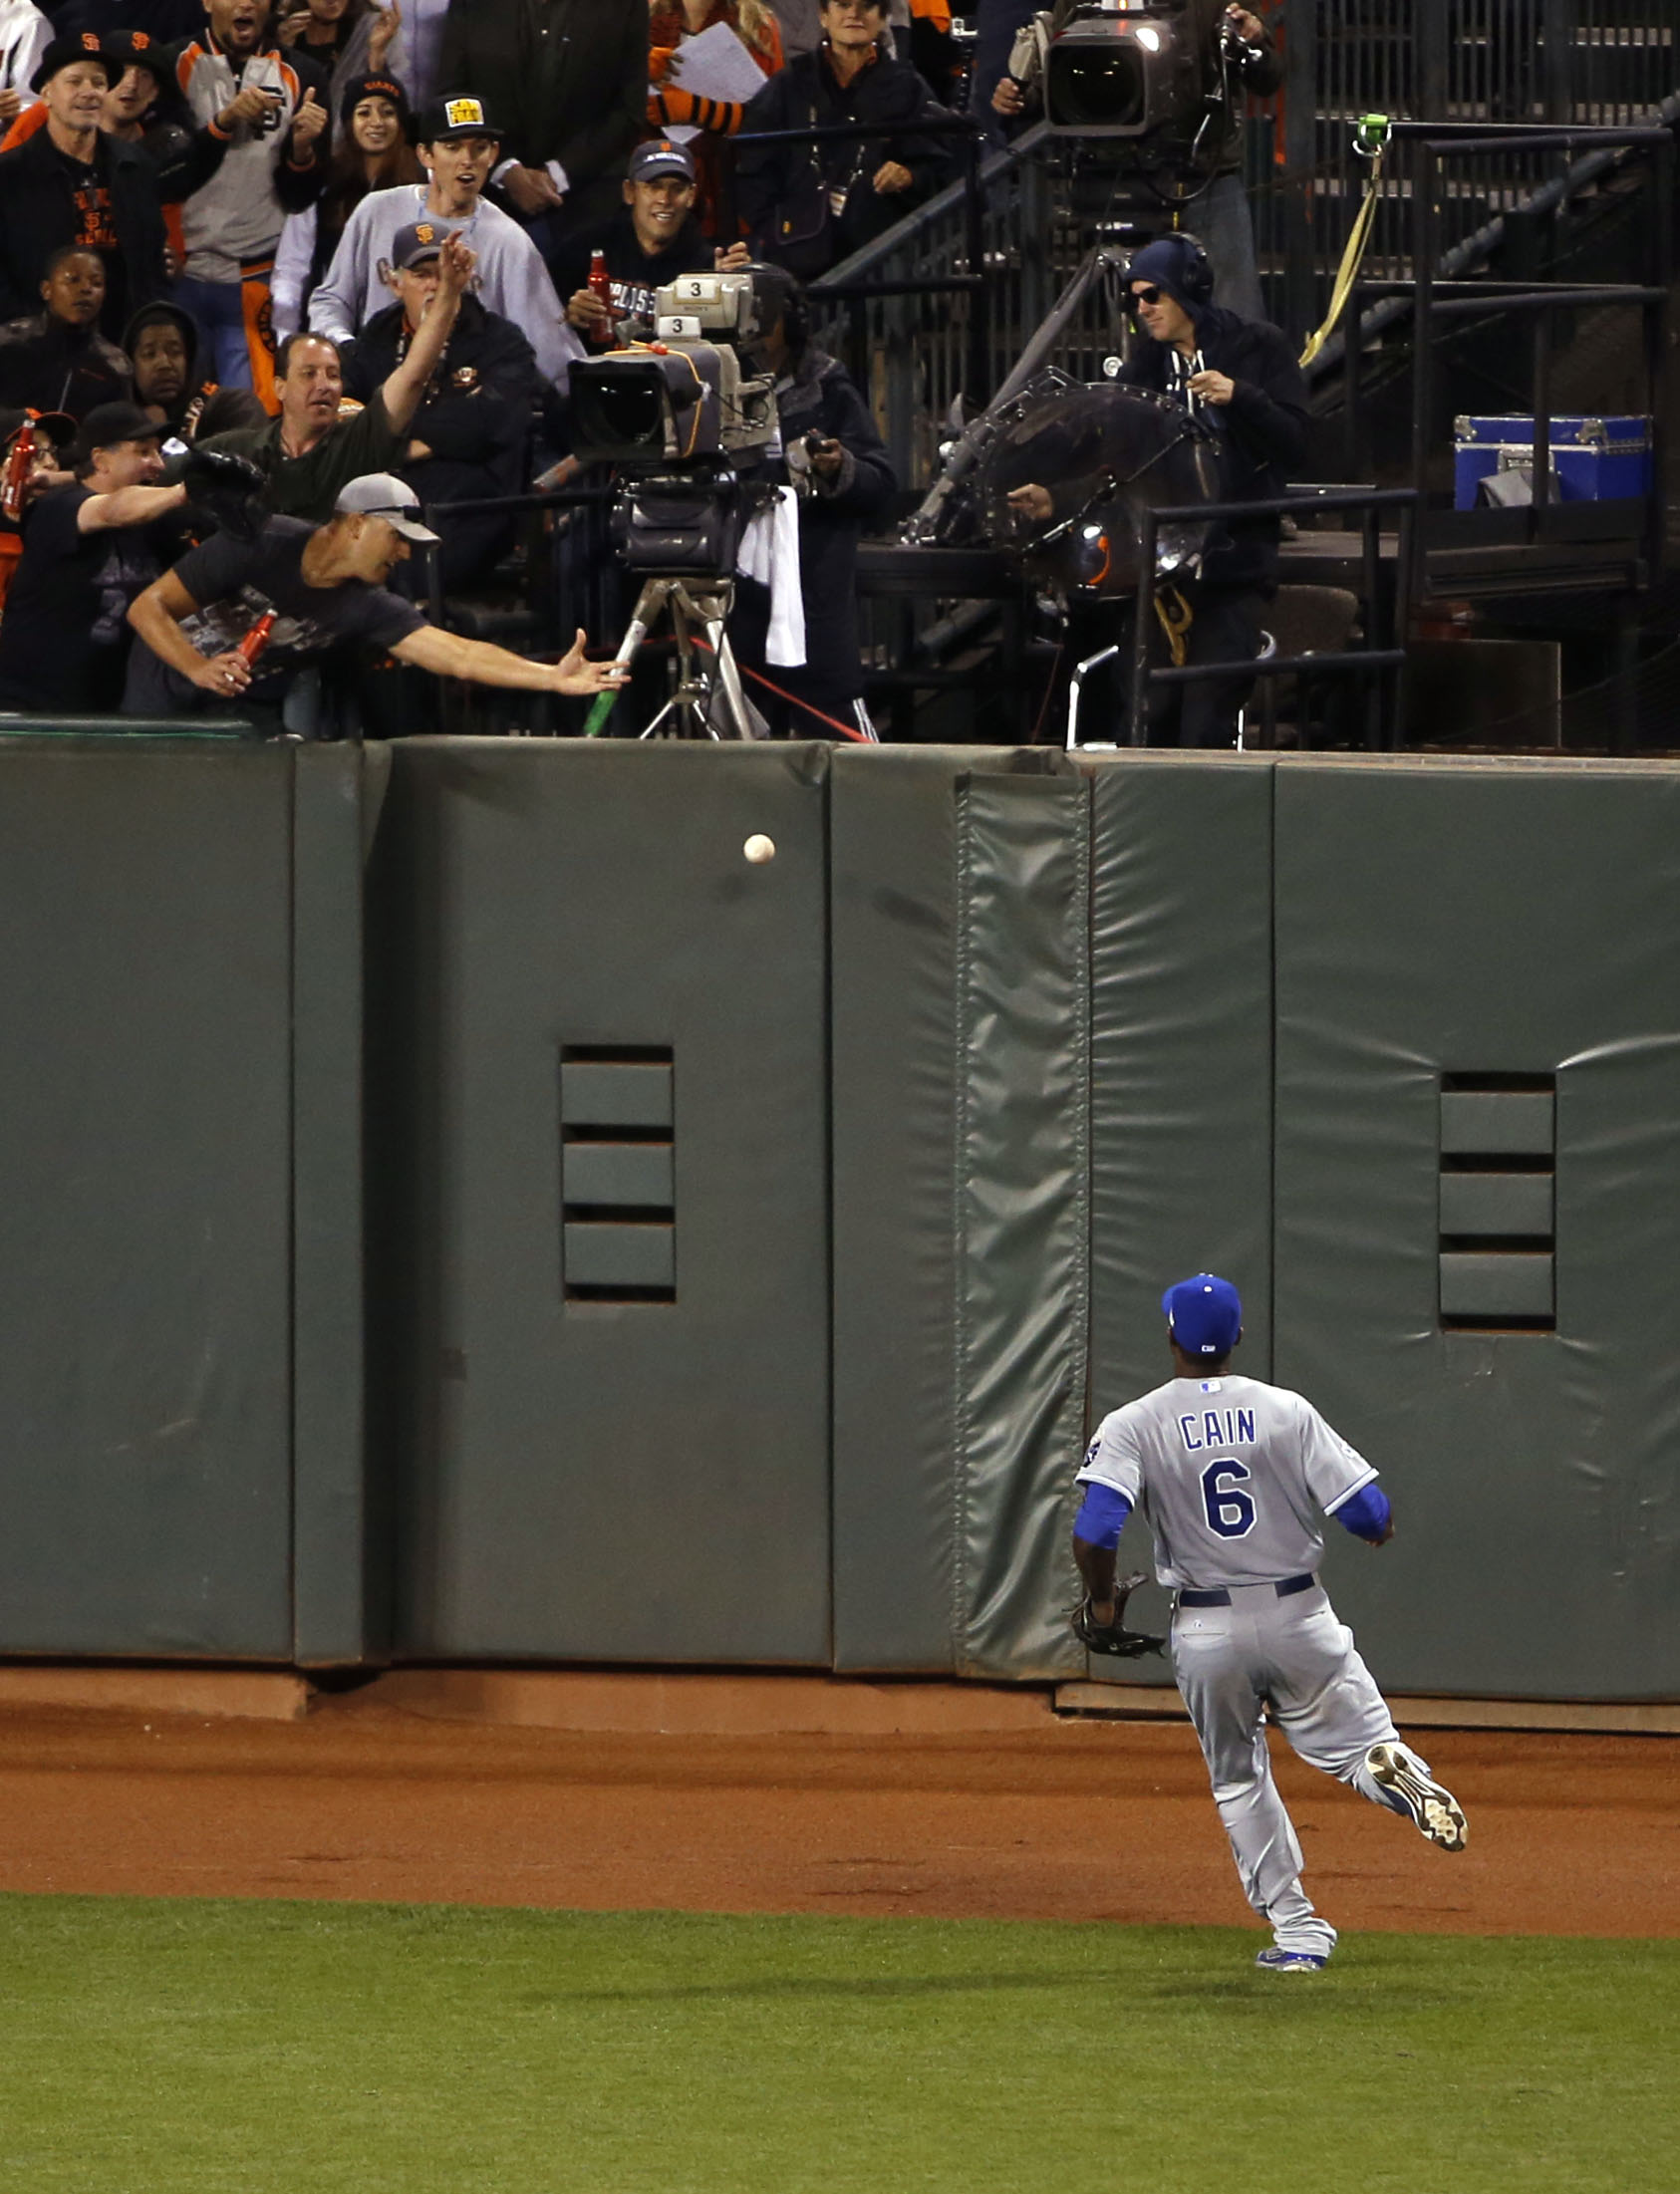 Lorenzo Cain could only watch Juan Perez's double hit off the wall. (USA Today)